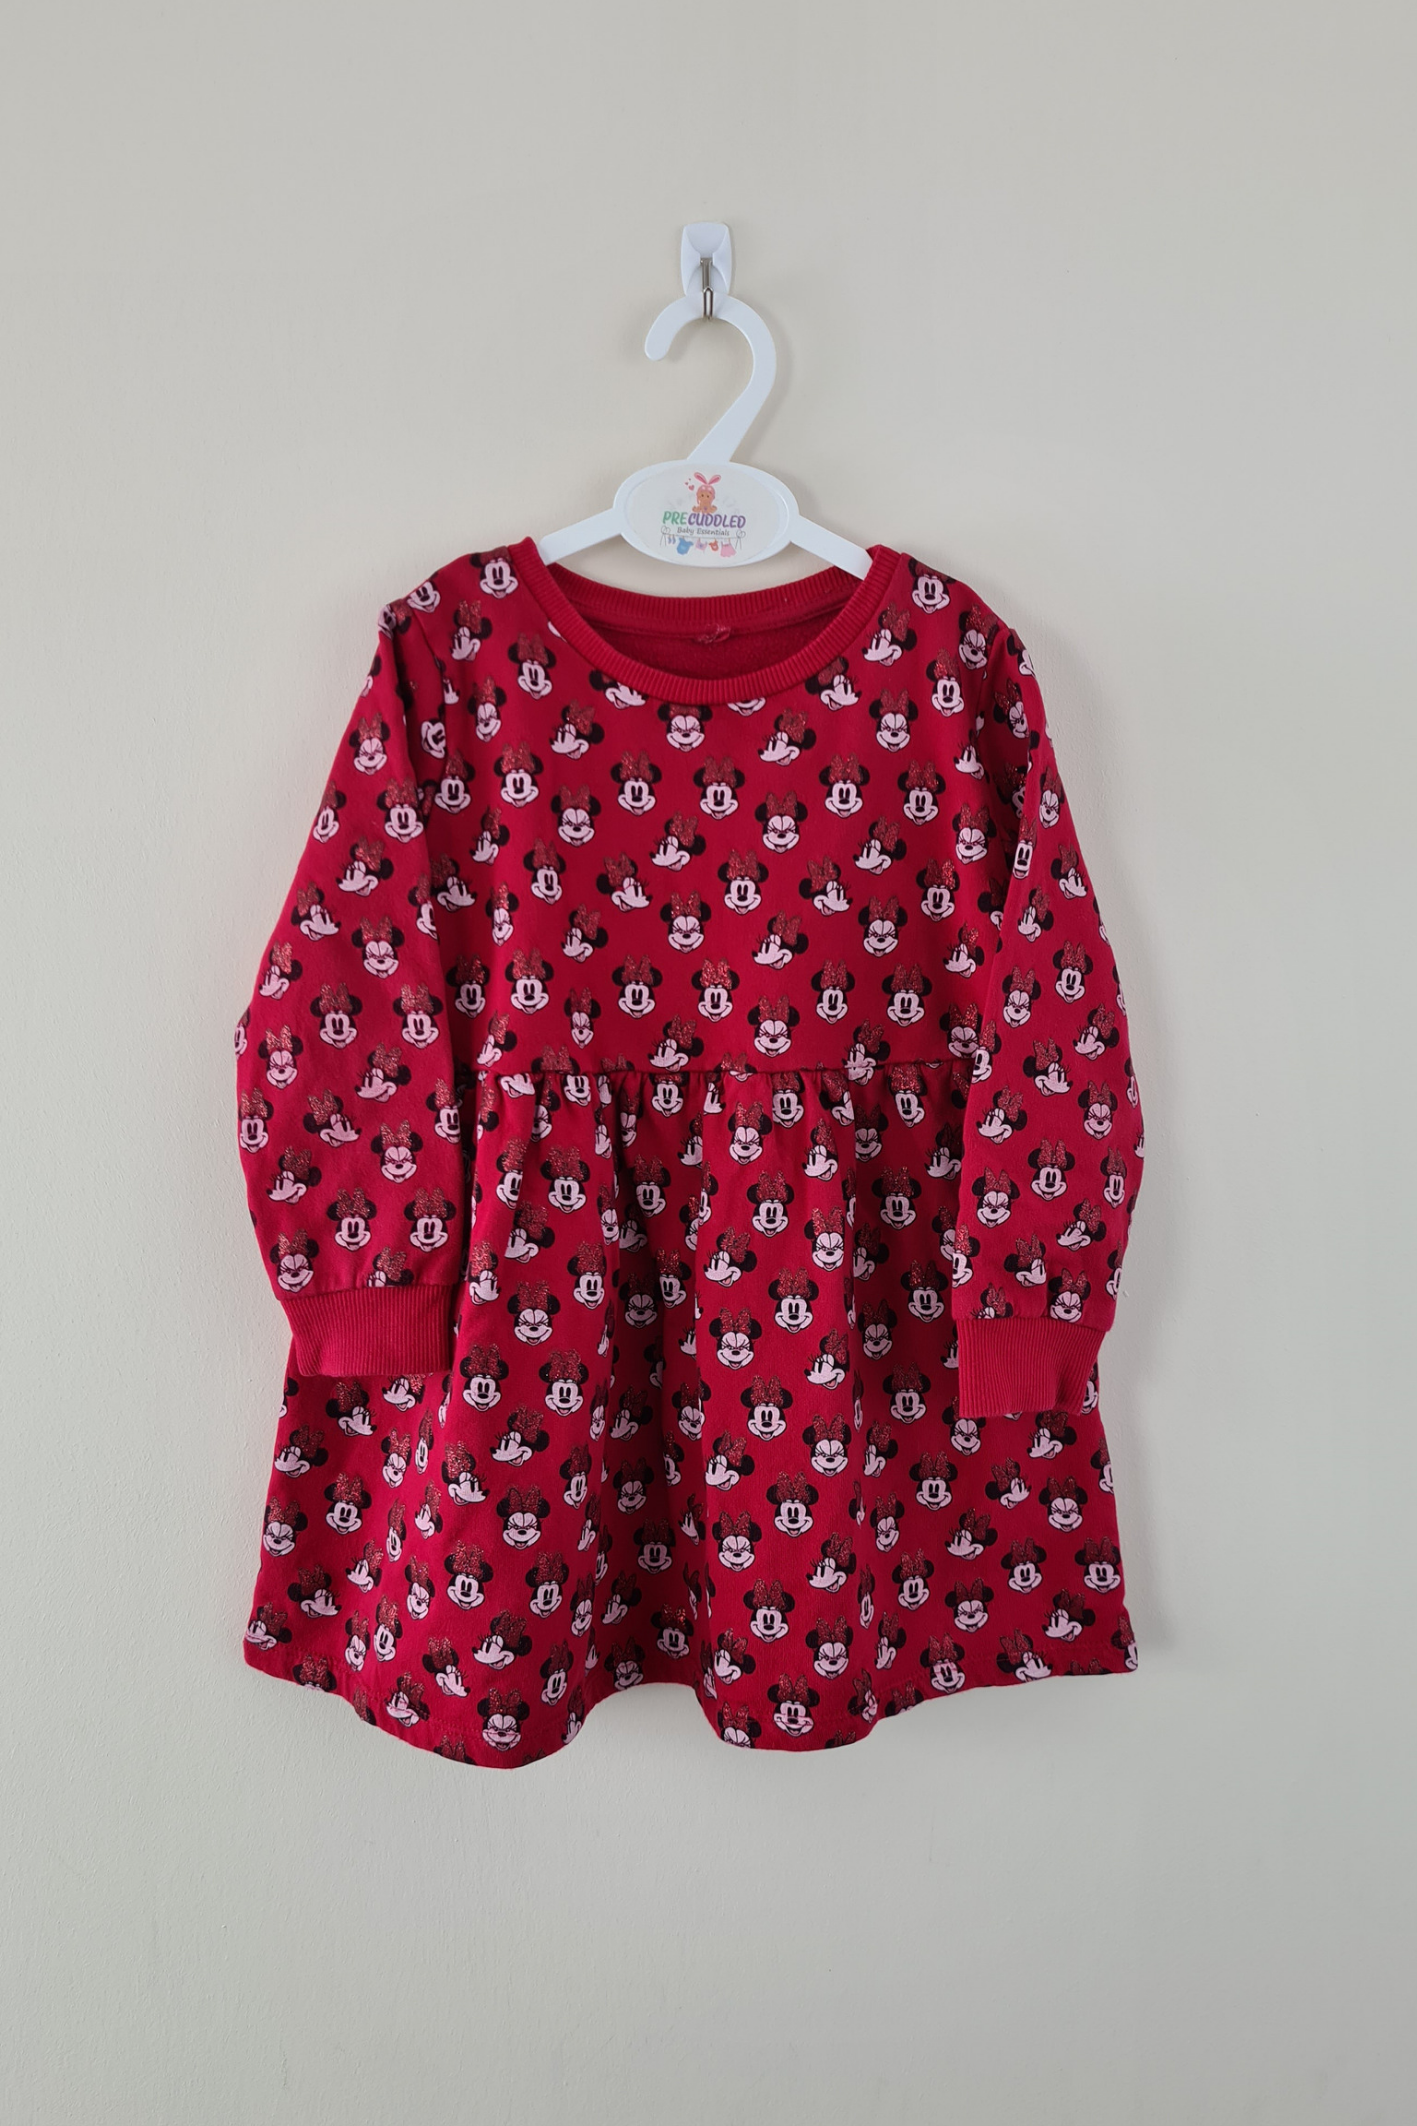 2-3y - Minnie Mouse Red Sweater Dress (Disney)